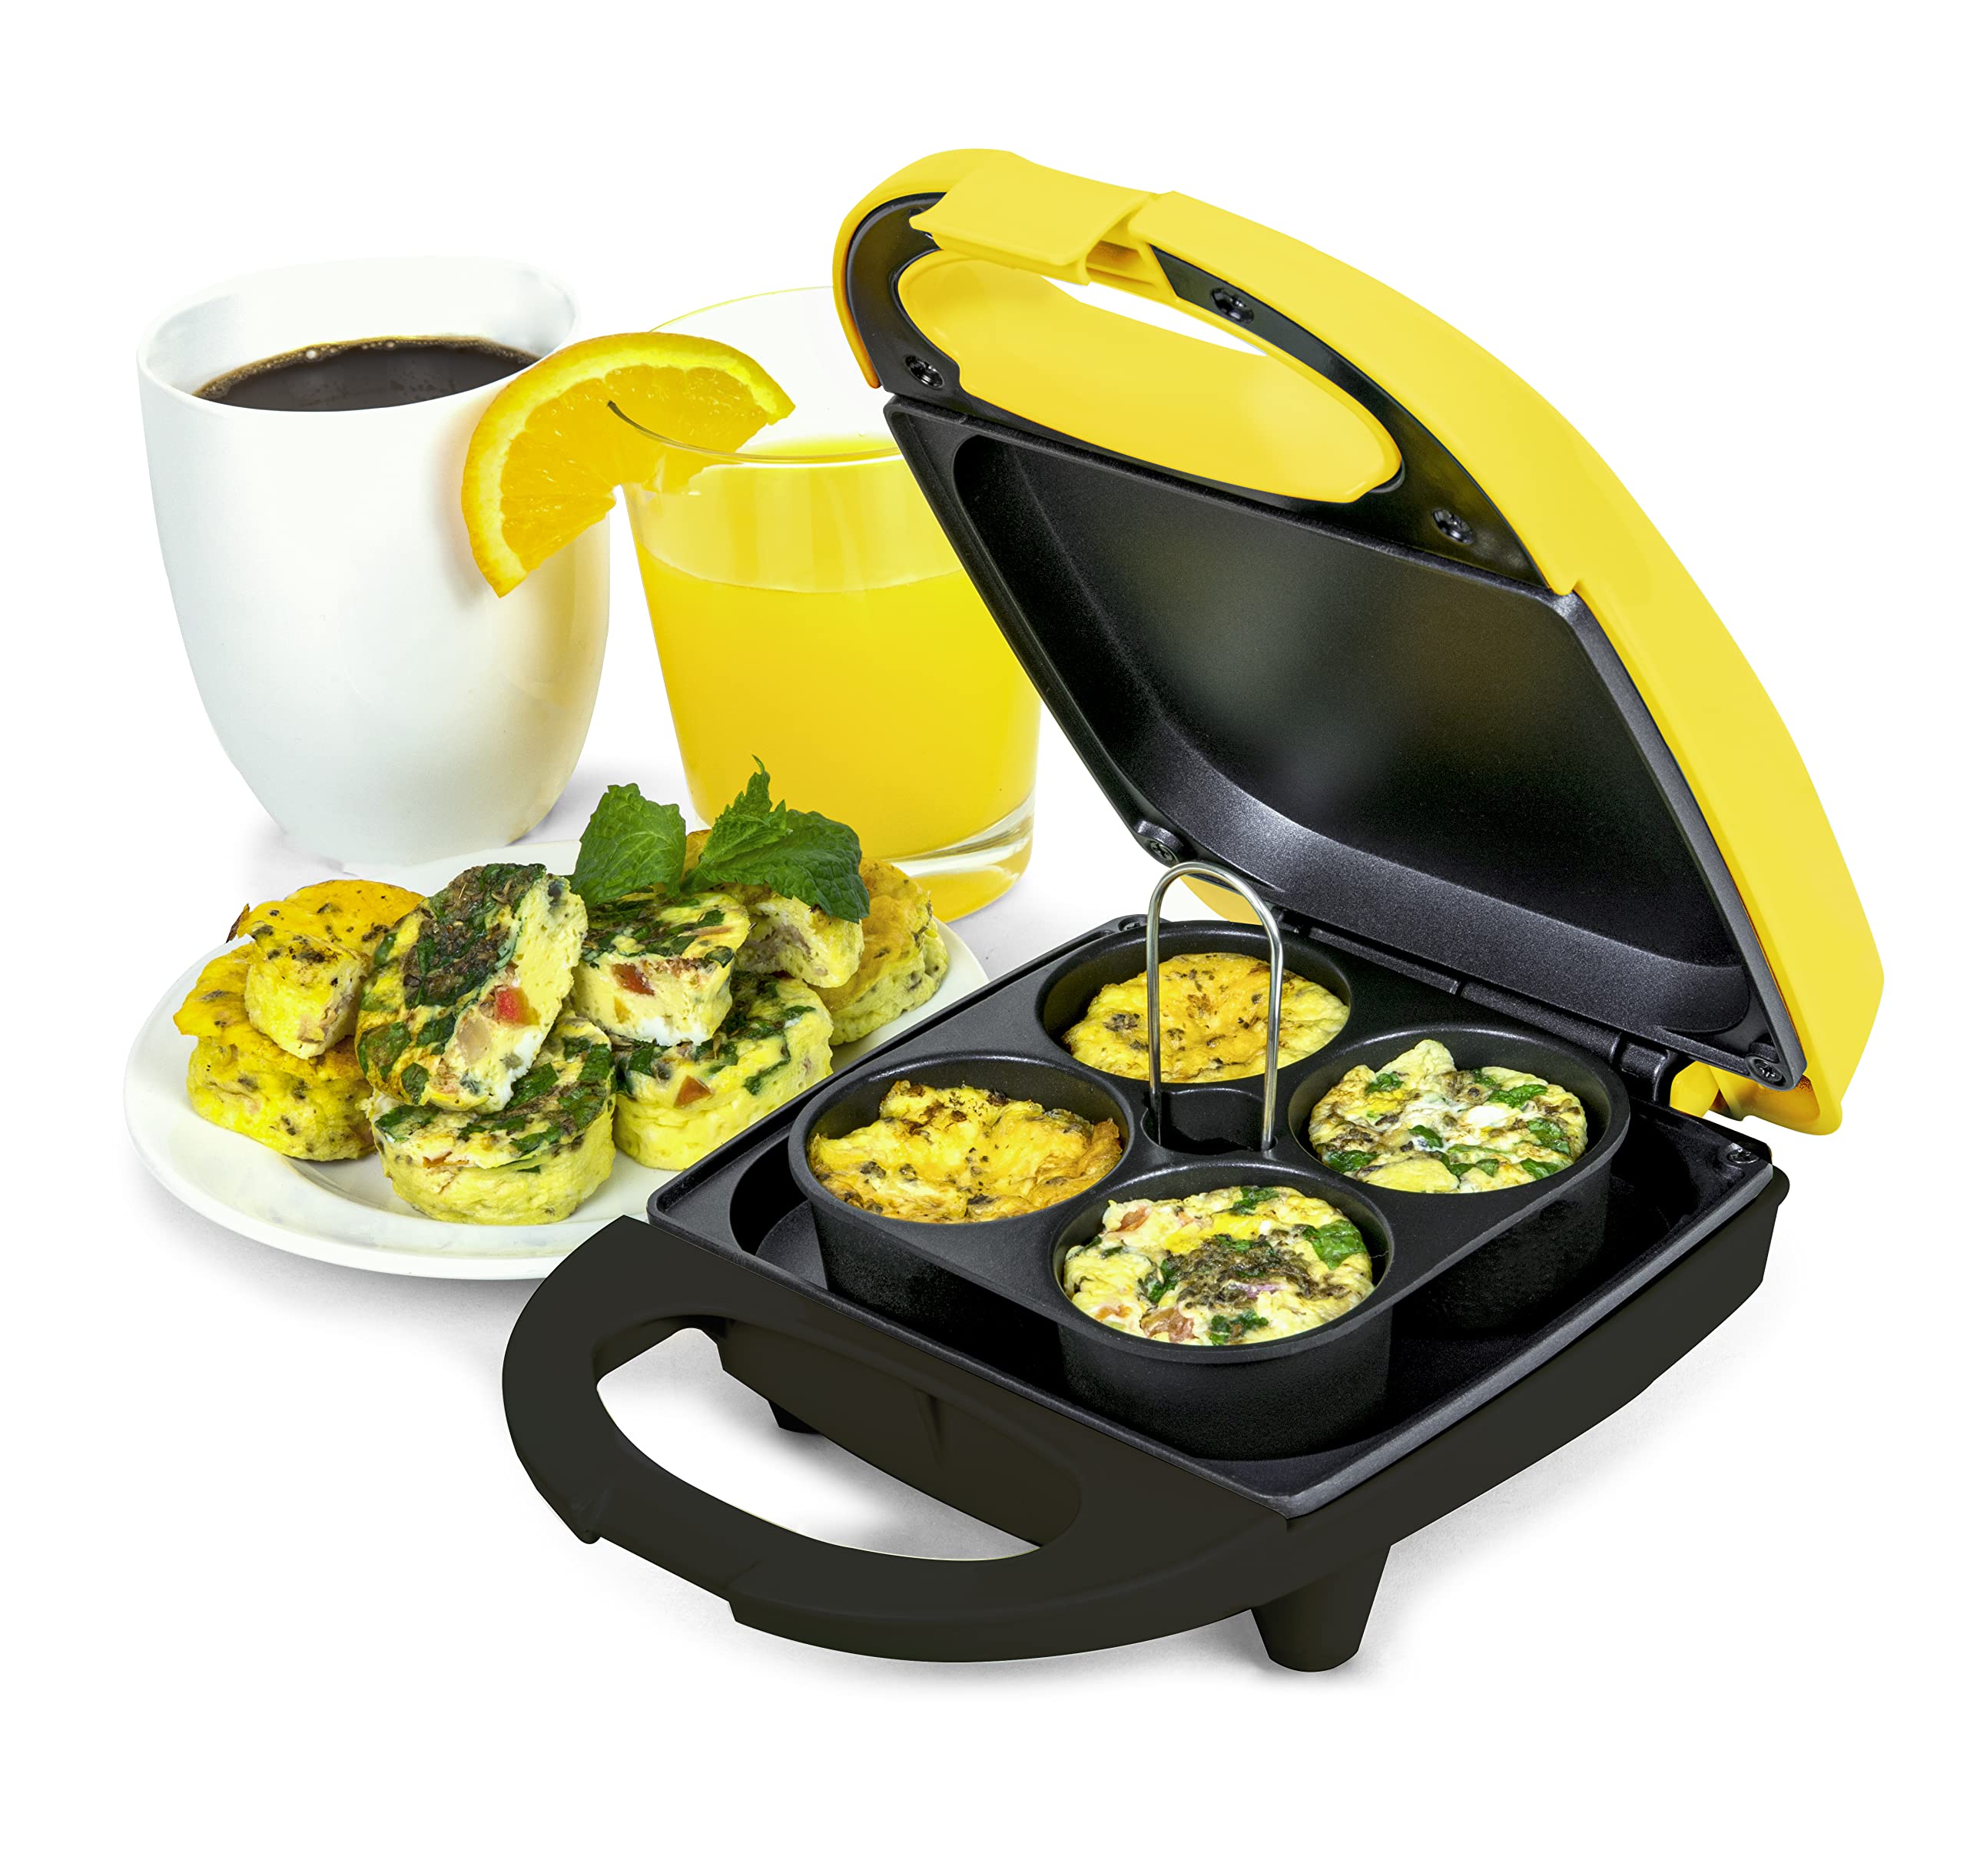 Nostalgia MyMini Personal Breakfast Bites, Perfect for Eggs, Omelets Muffins,  Sandwiches, Desserts, Keto, Healthy Snack Size & Paleo, Portion Control  Cook 4 Mini Pieces at A Time, Yellow Egg Bite Maker